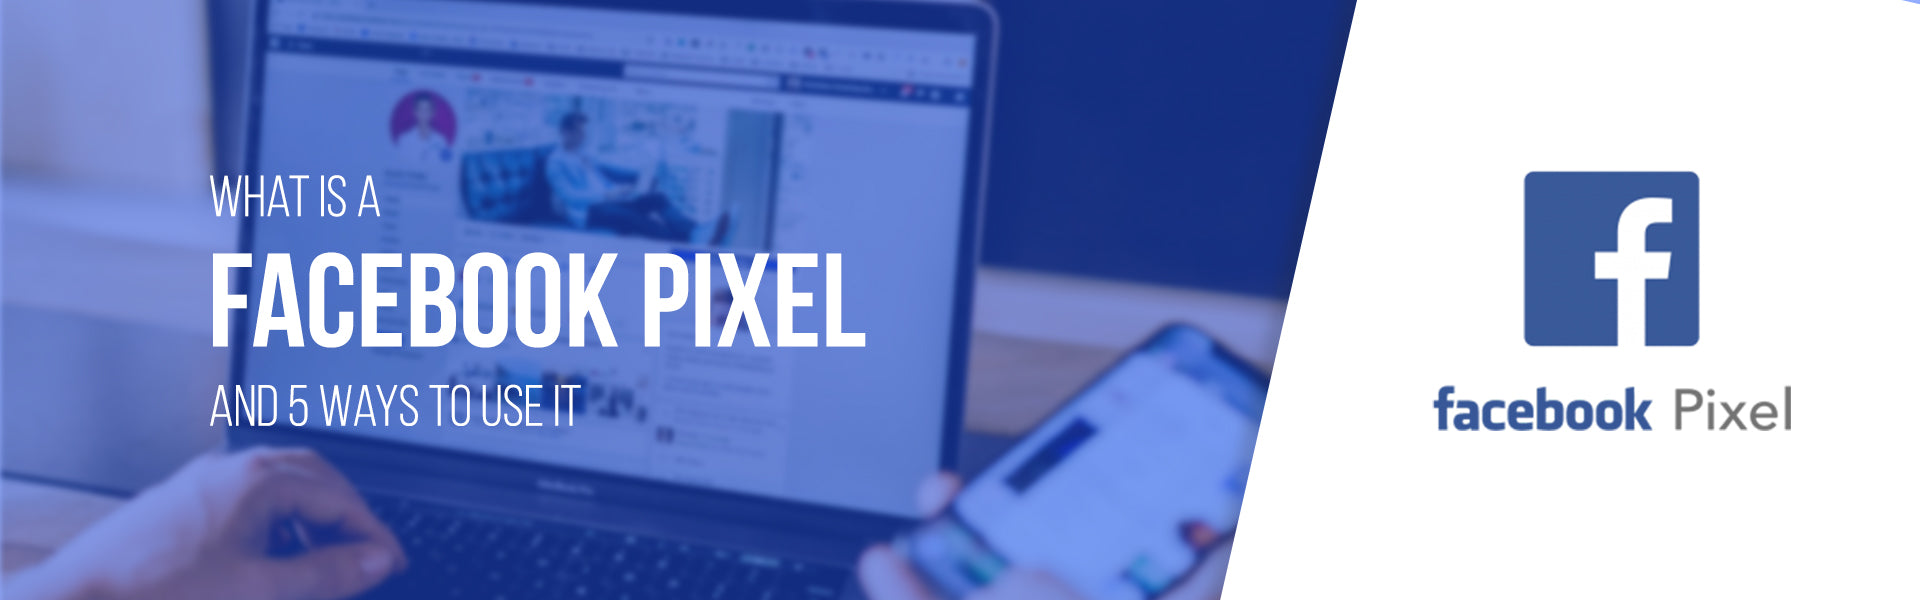 What is a Facebook Pixel and 5 Ways to Use It